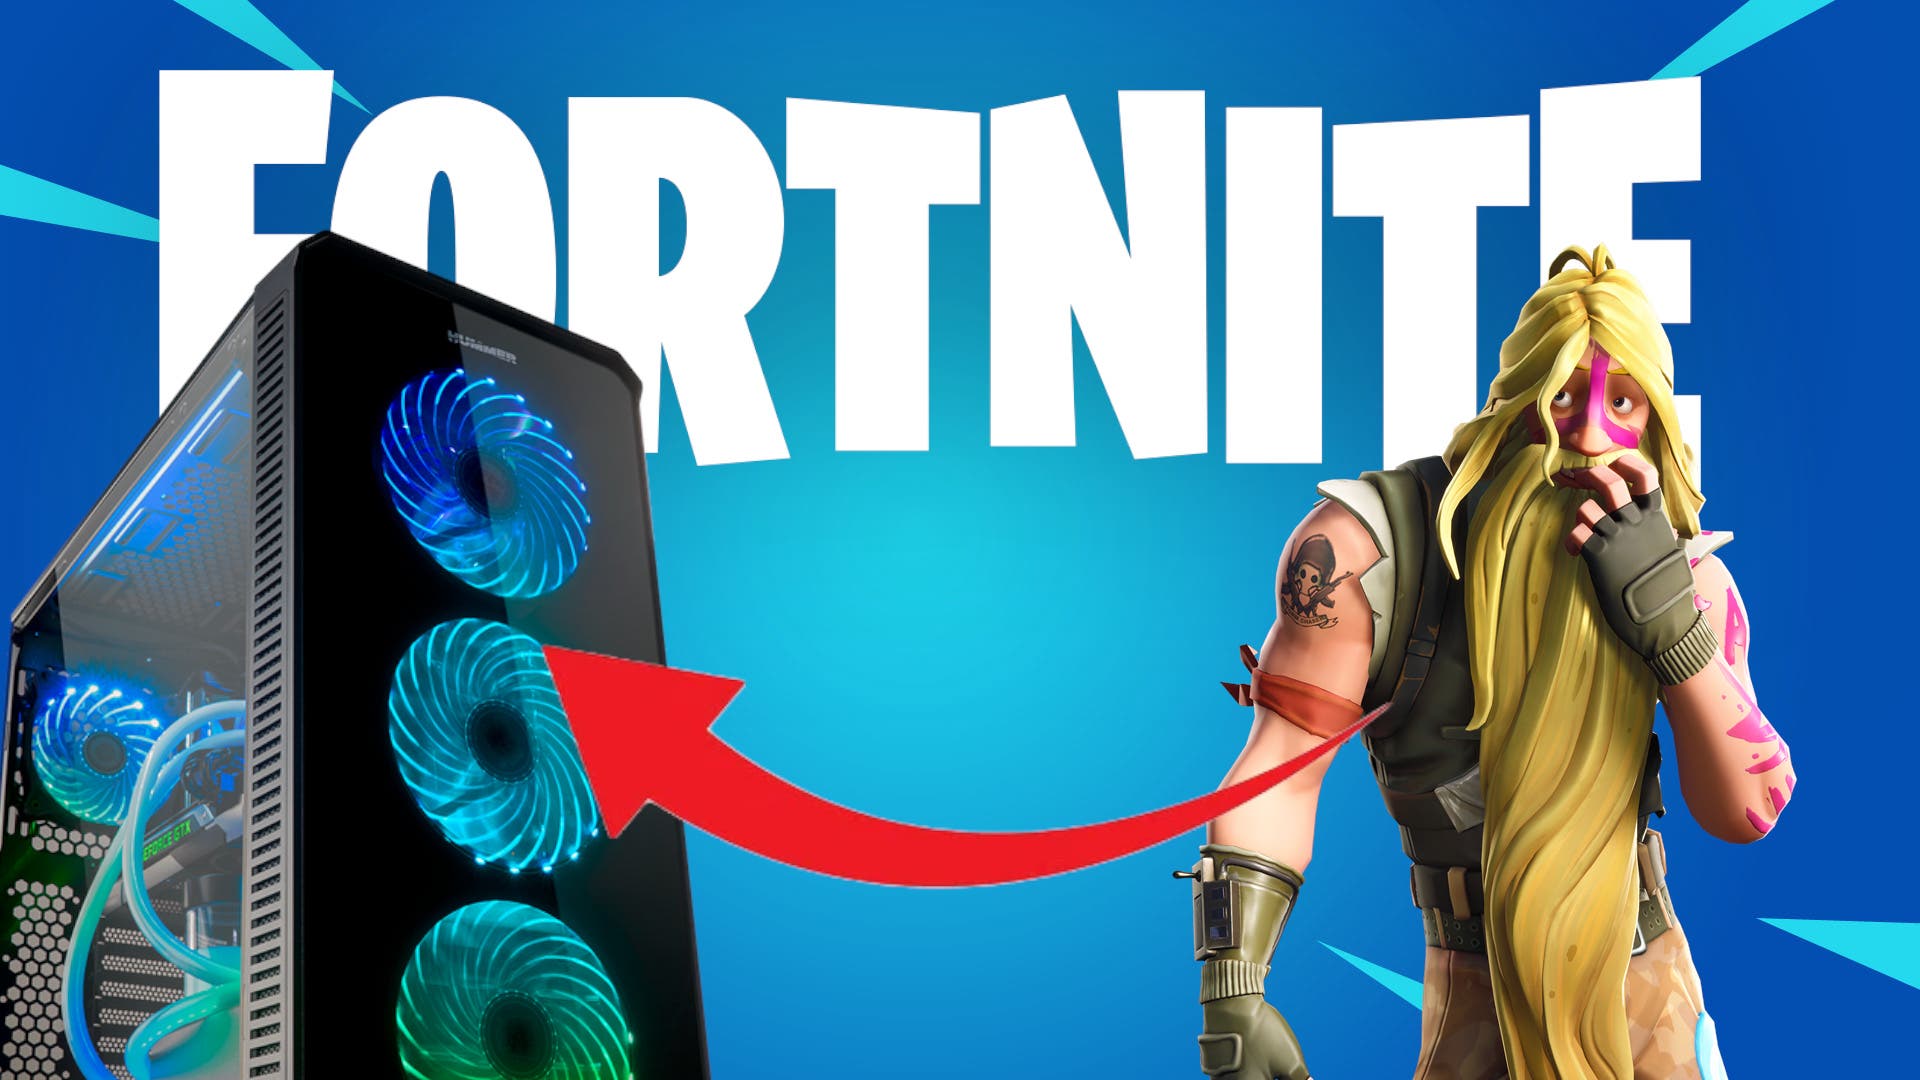 You won’t be able to play Fortnite on PC from March 10 if you don’t meet this essential requirement